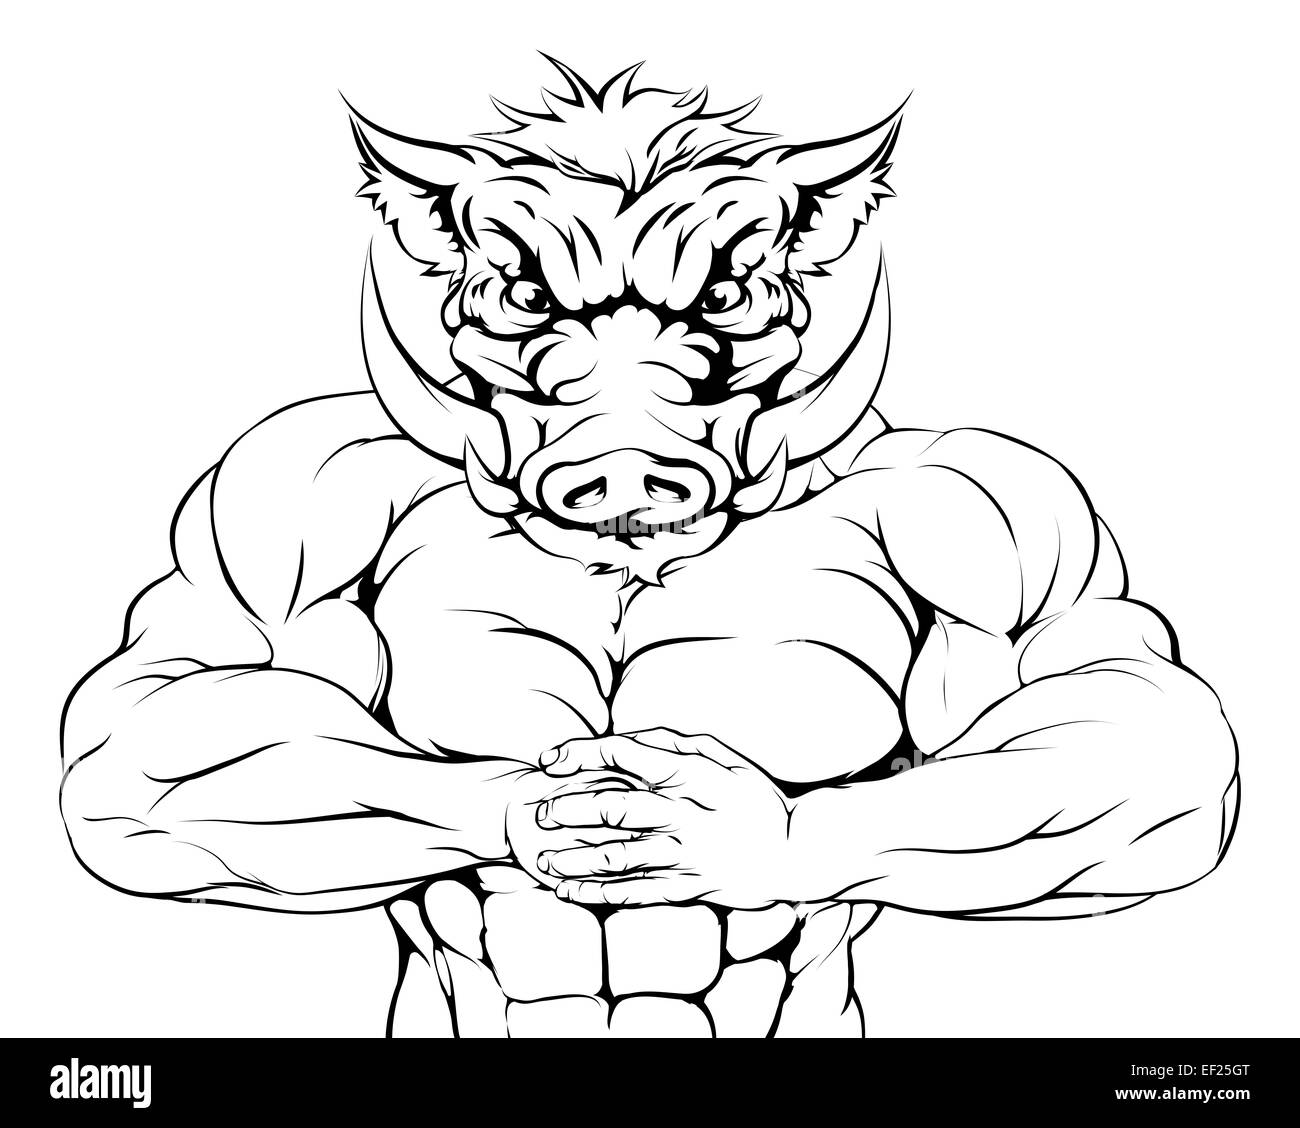 A tough muscular boar mascot character getting ready for a fight Stock Photo